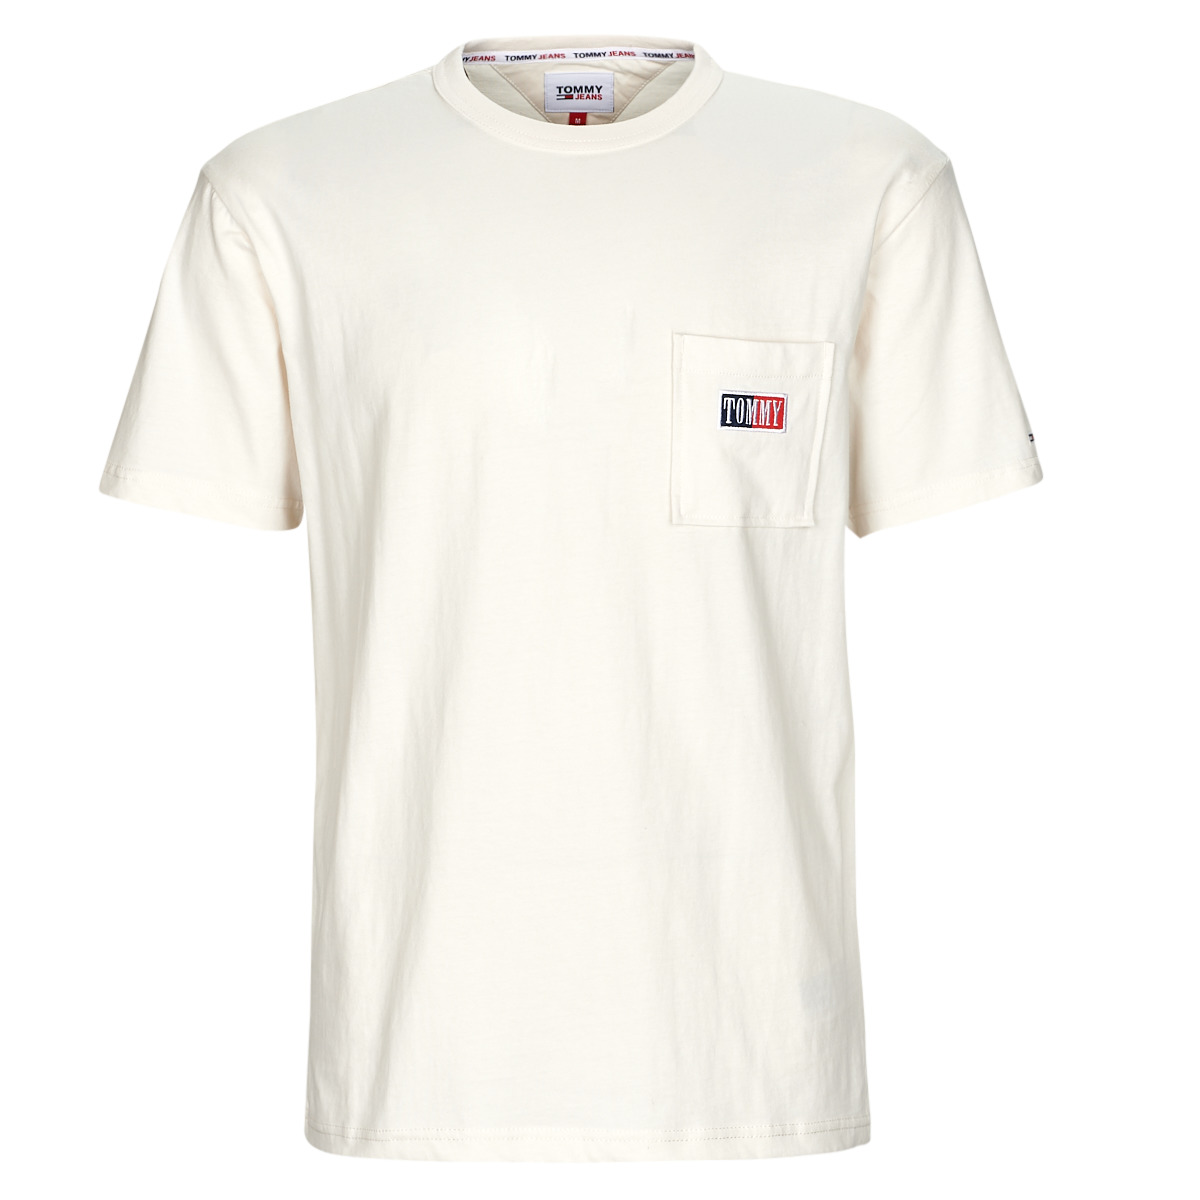 delivery Spartoo White | NET TEE TIMELESS short-sleeved TJM Tommy t-shirts ! TOMMY CLSC Clothing Men Jeans - Free -